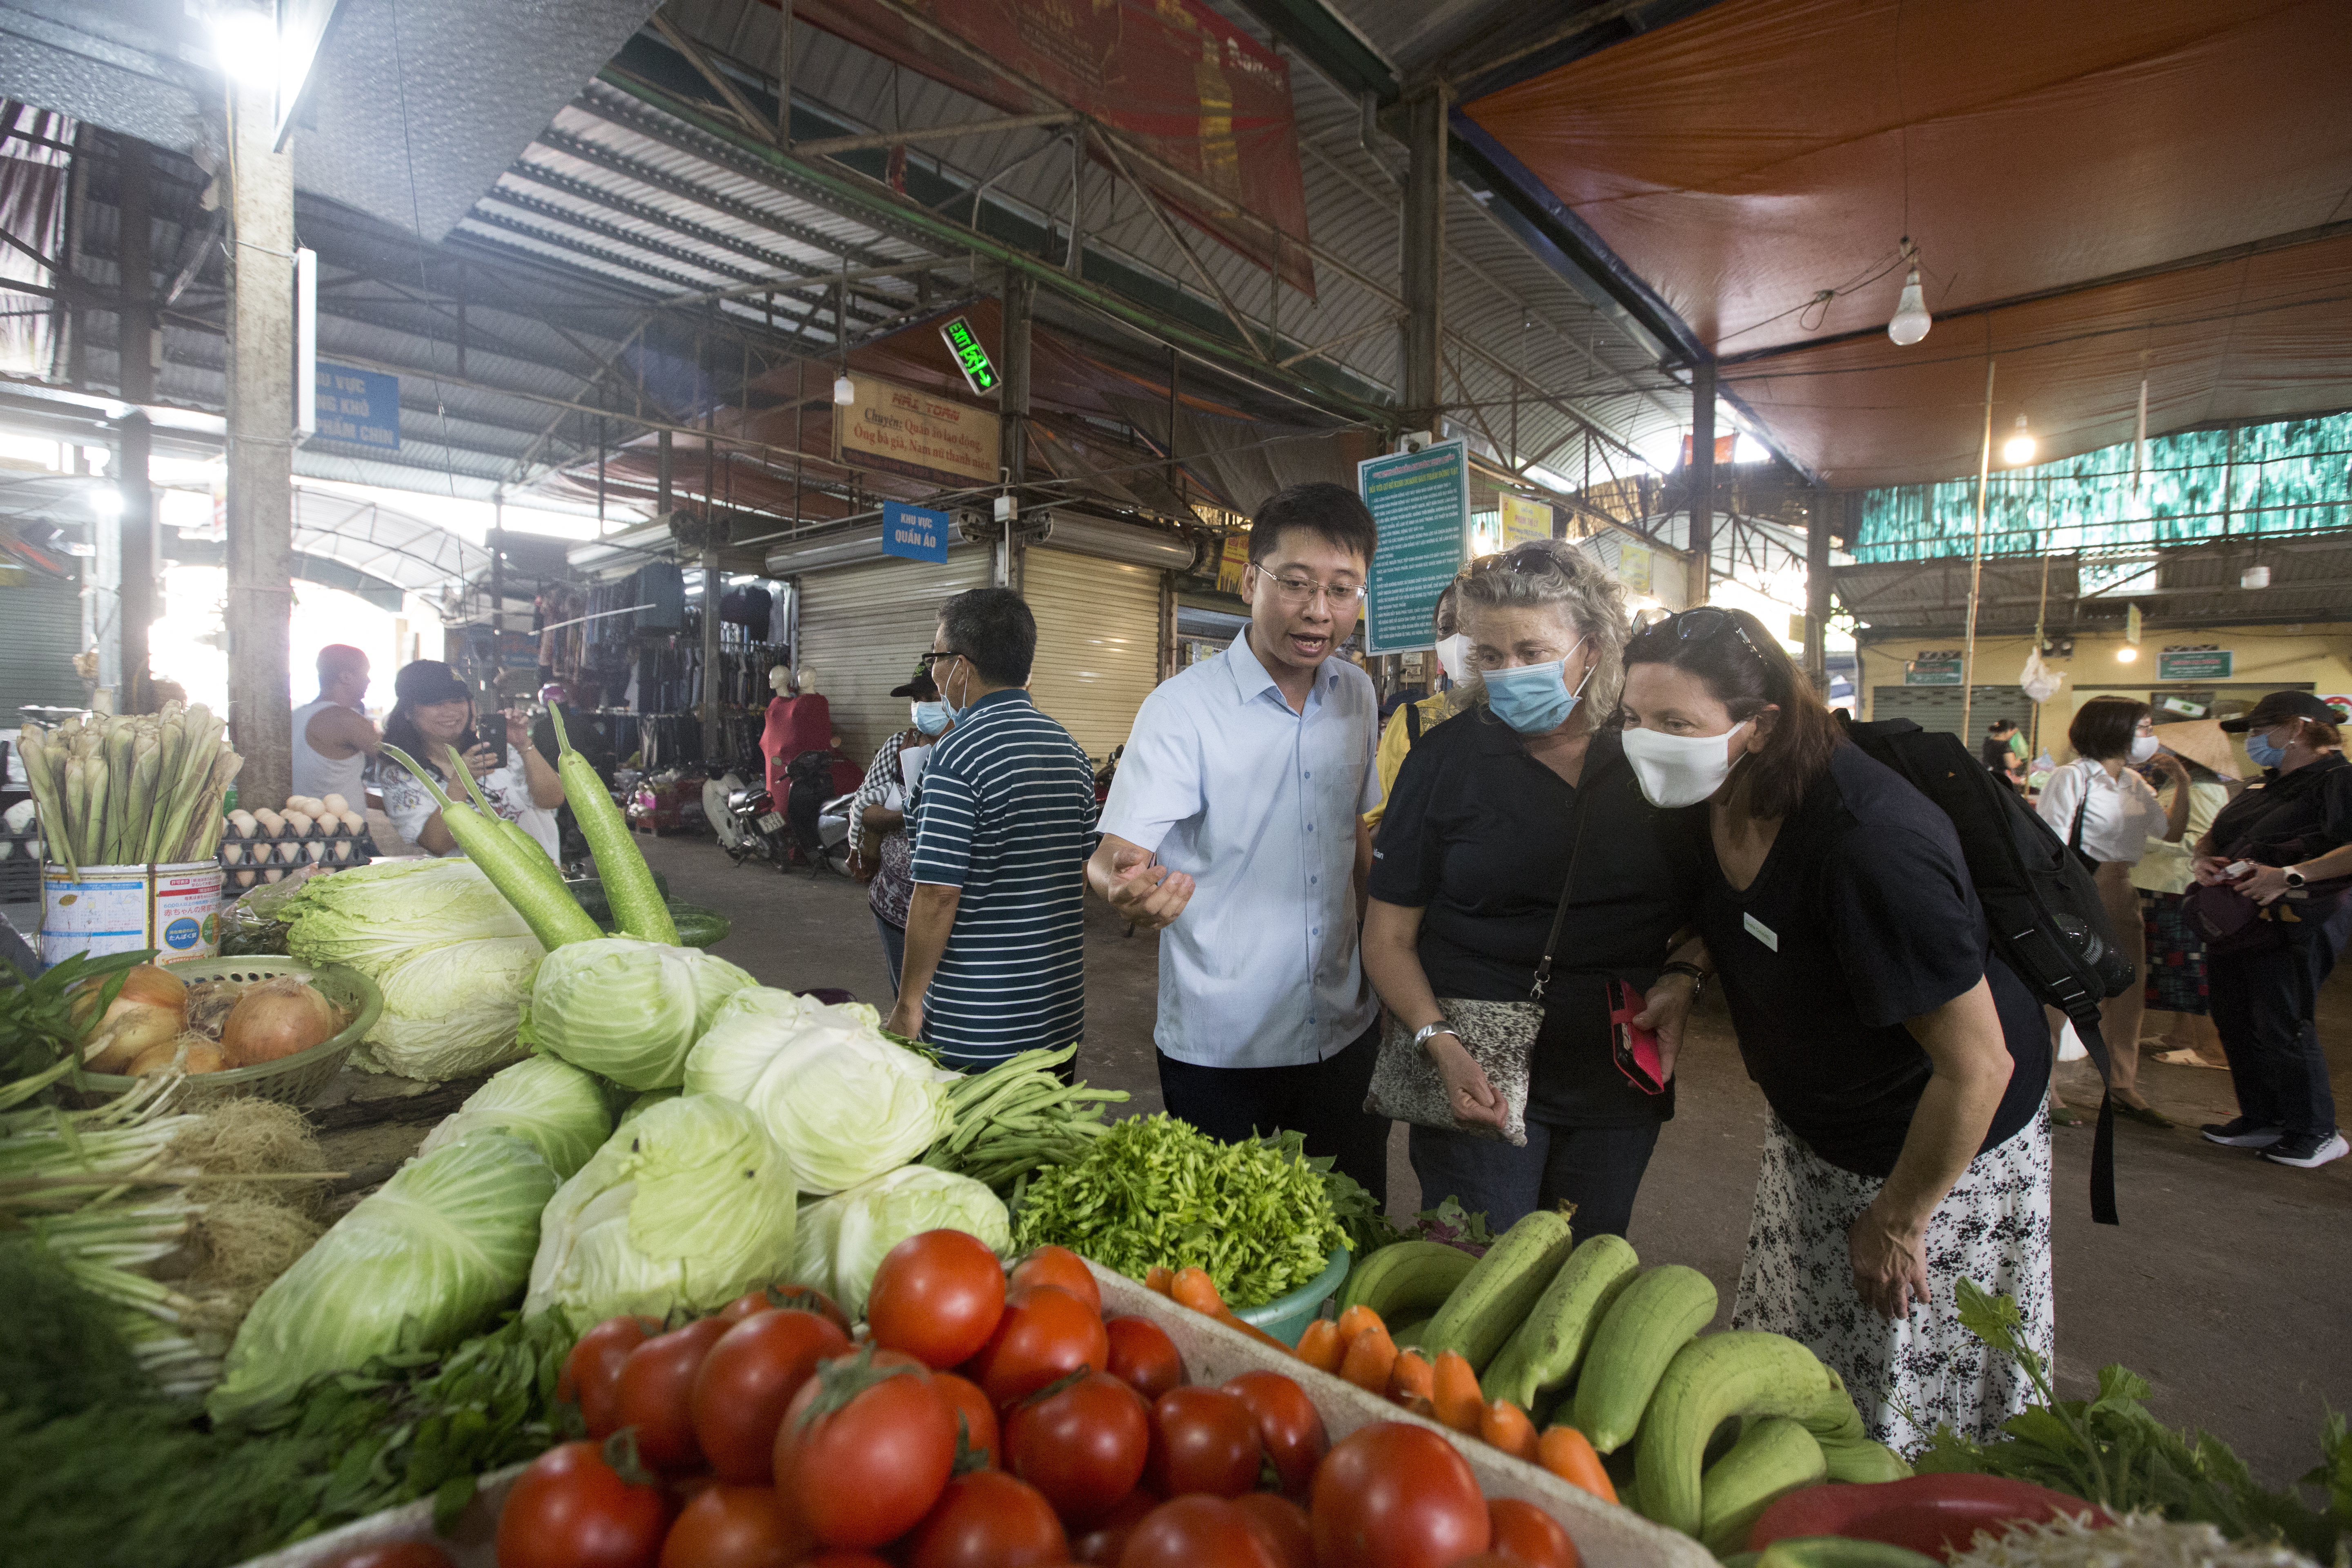 People inspecting produce at a market